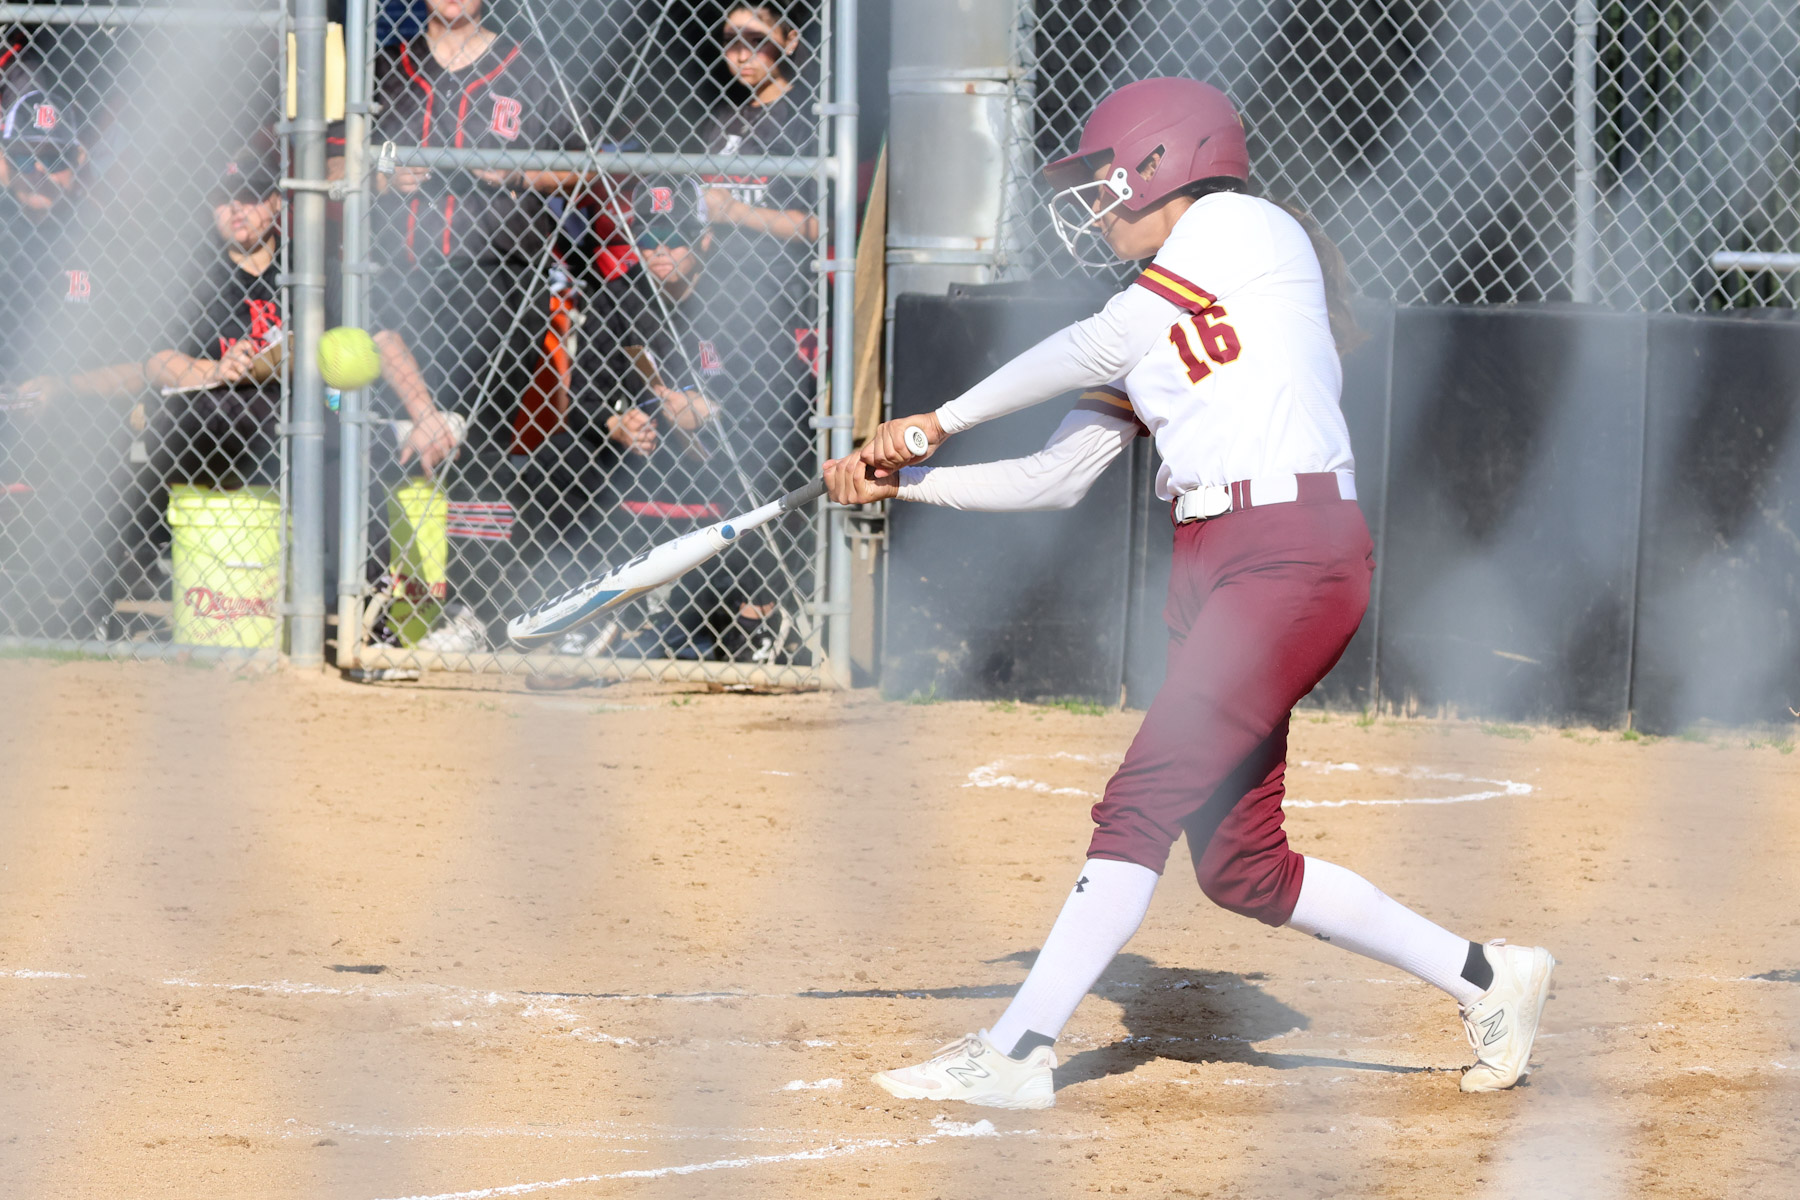 Alyssa Guzman with a hit in Tuesday's loss (photo by Richard Quinton)